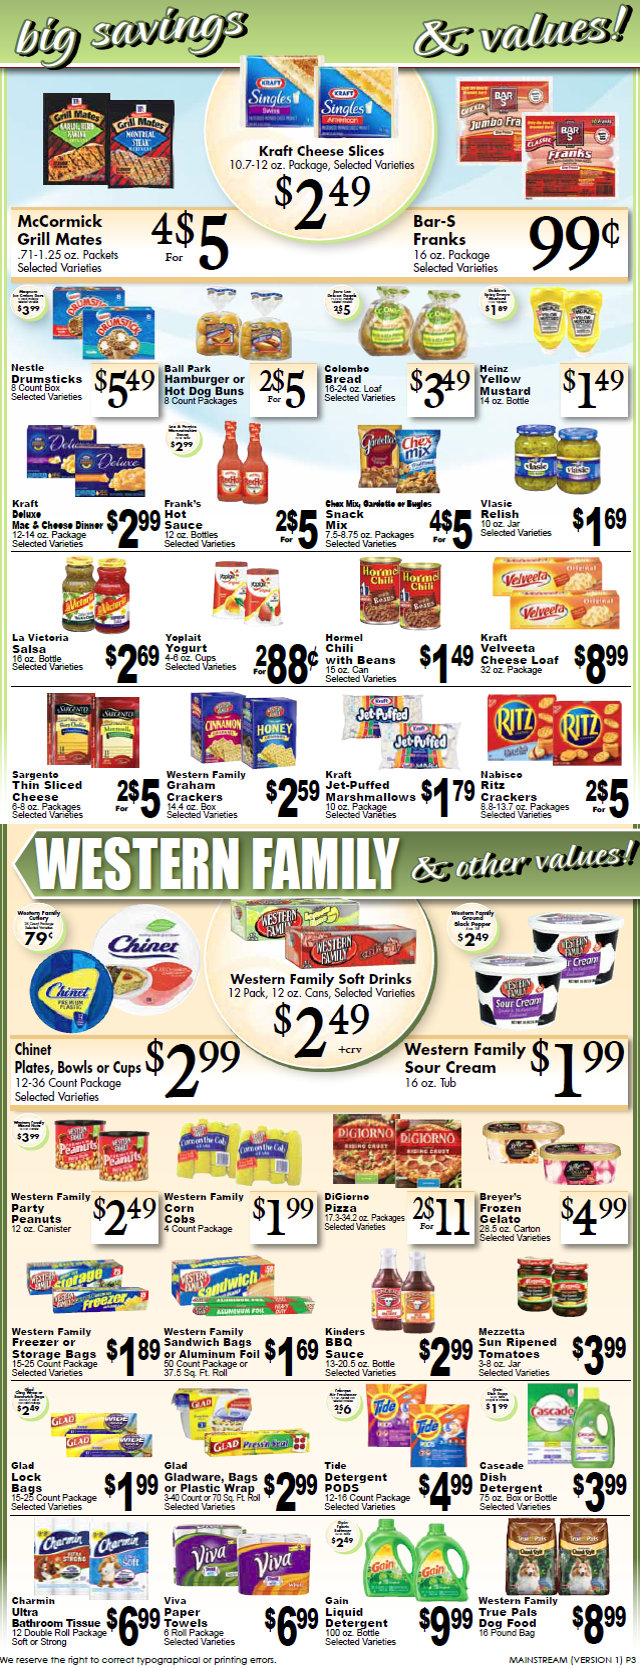 Big Trees Market Weekly Specials & Grocery Ads Through September 6th